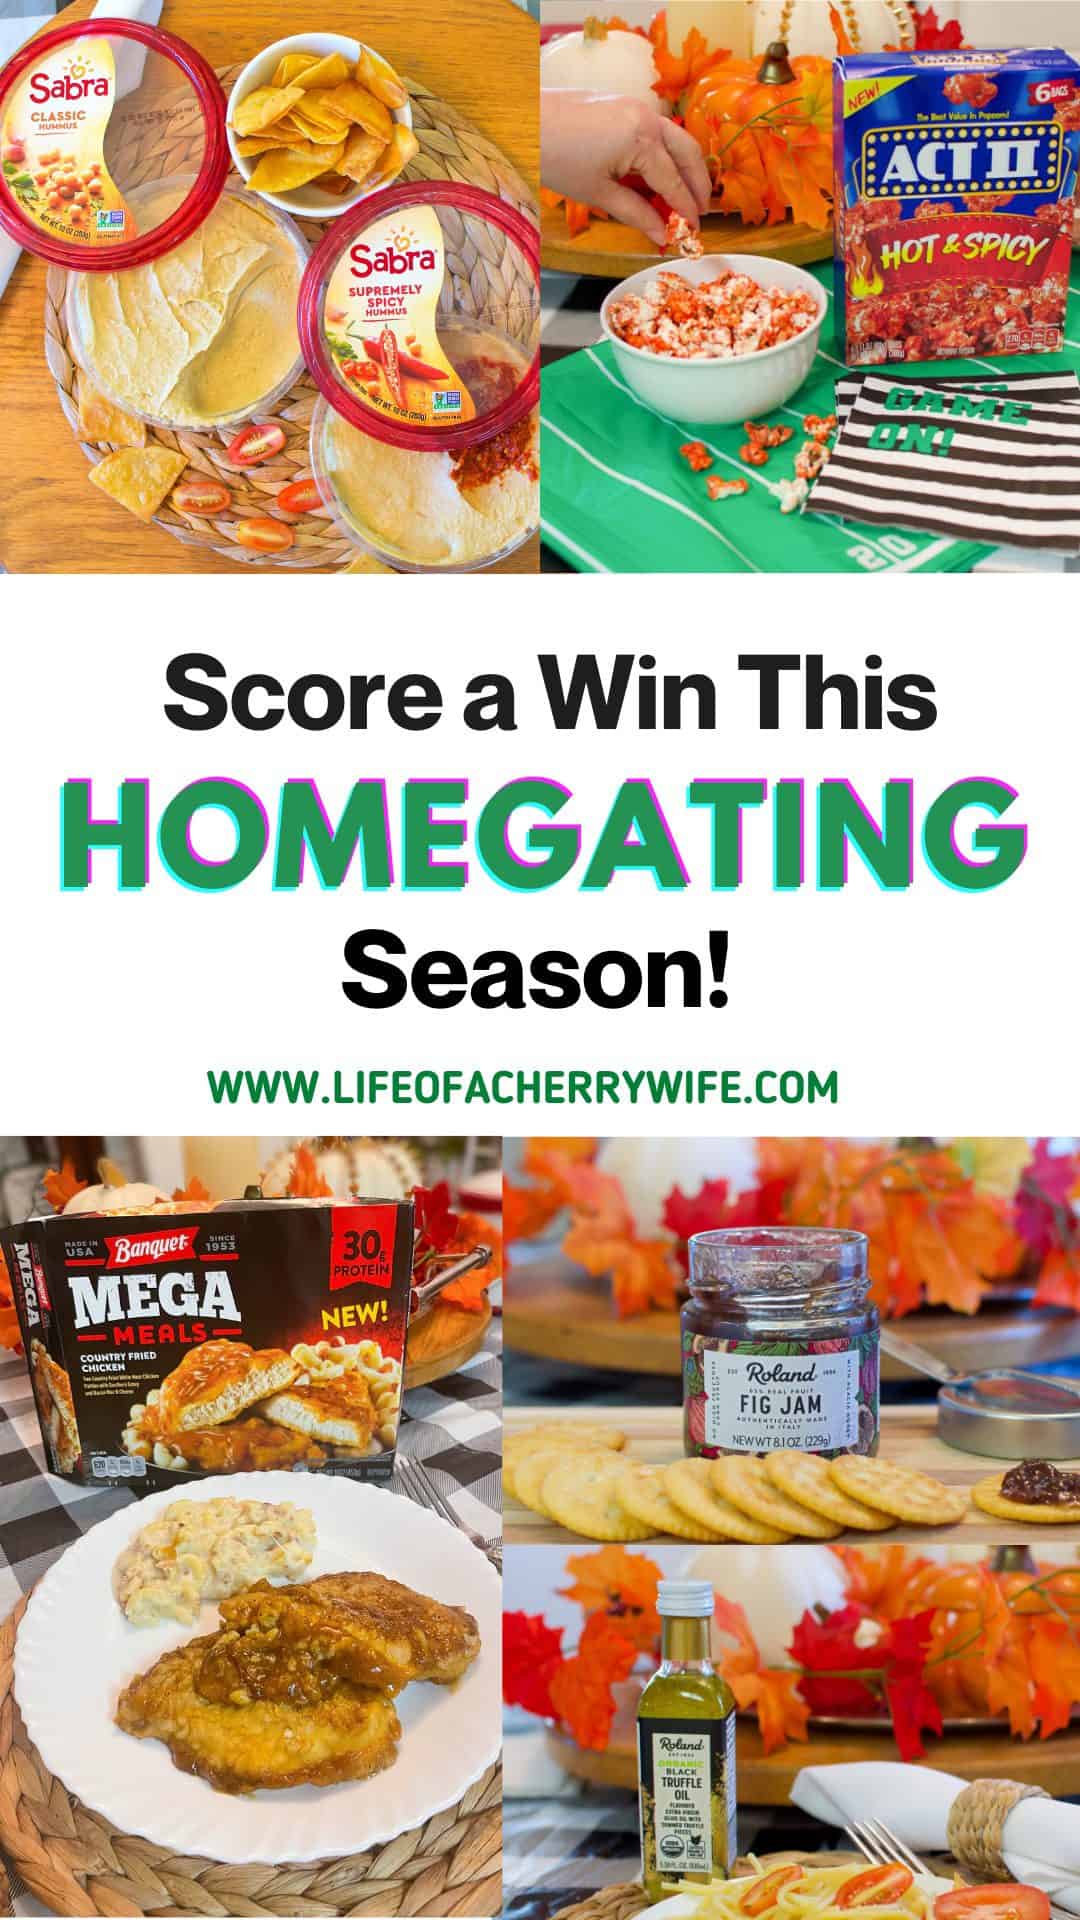 Score a Win This Homegating season!S